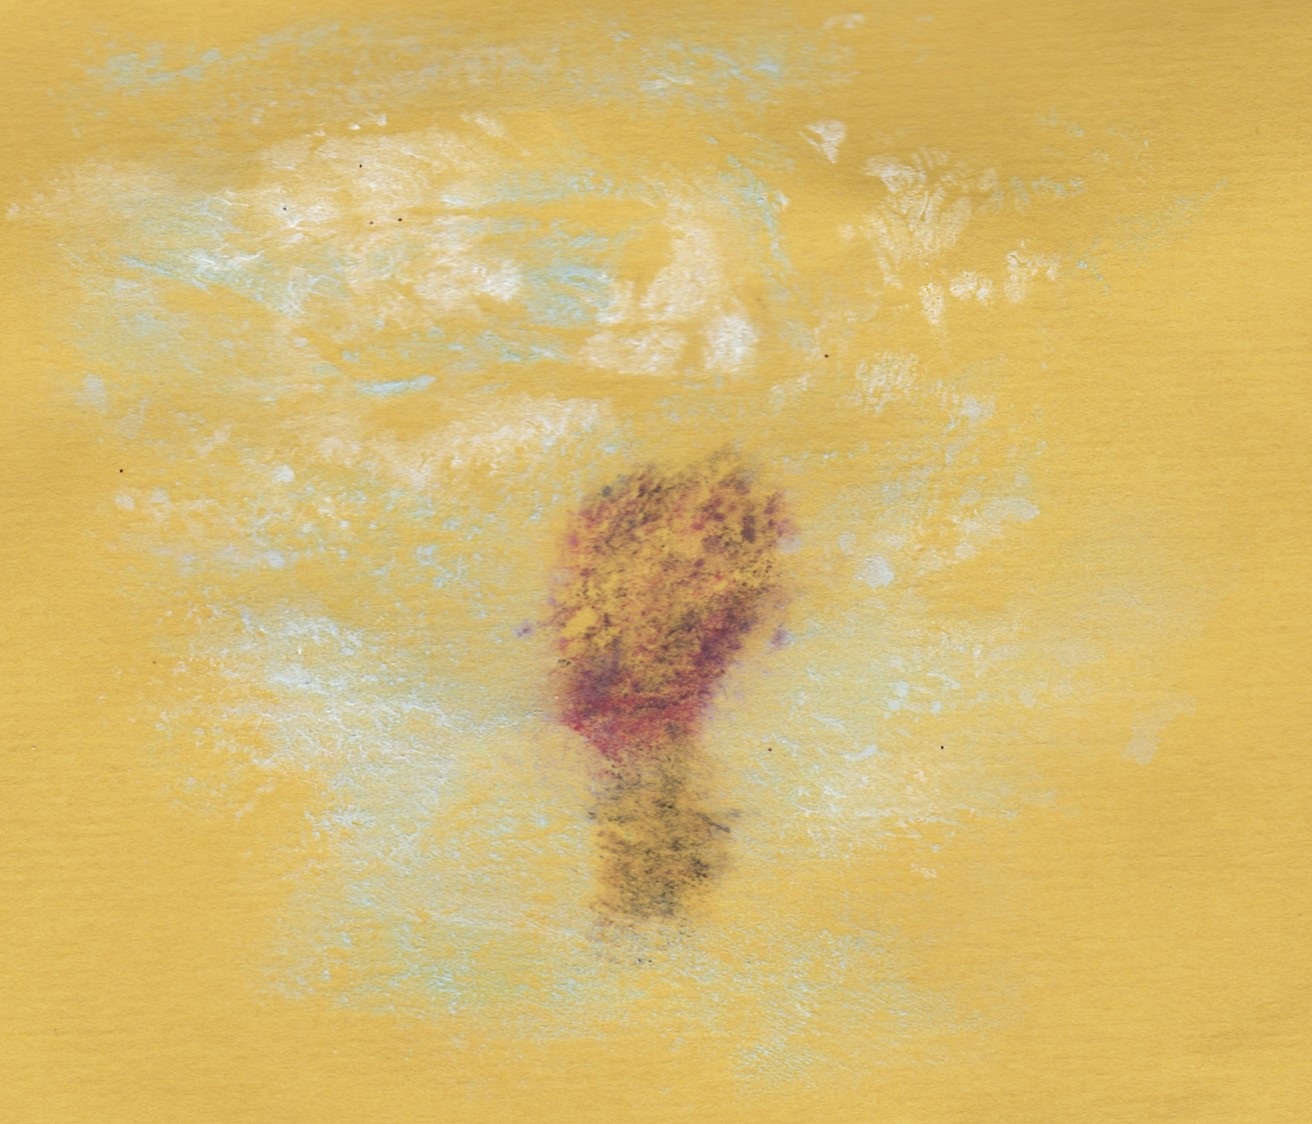 Scan of print made from labia painted with white clouds on a blue sky with a hot air balloon